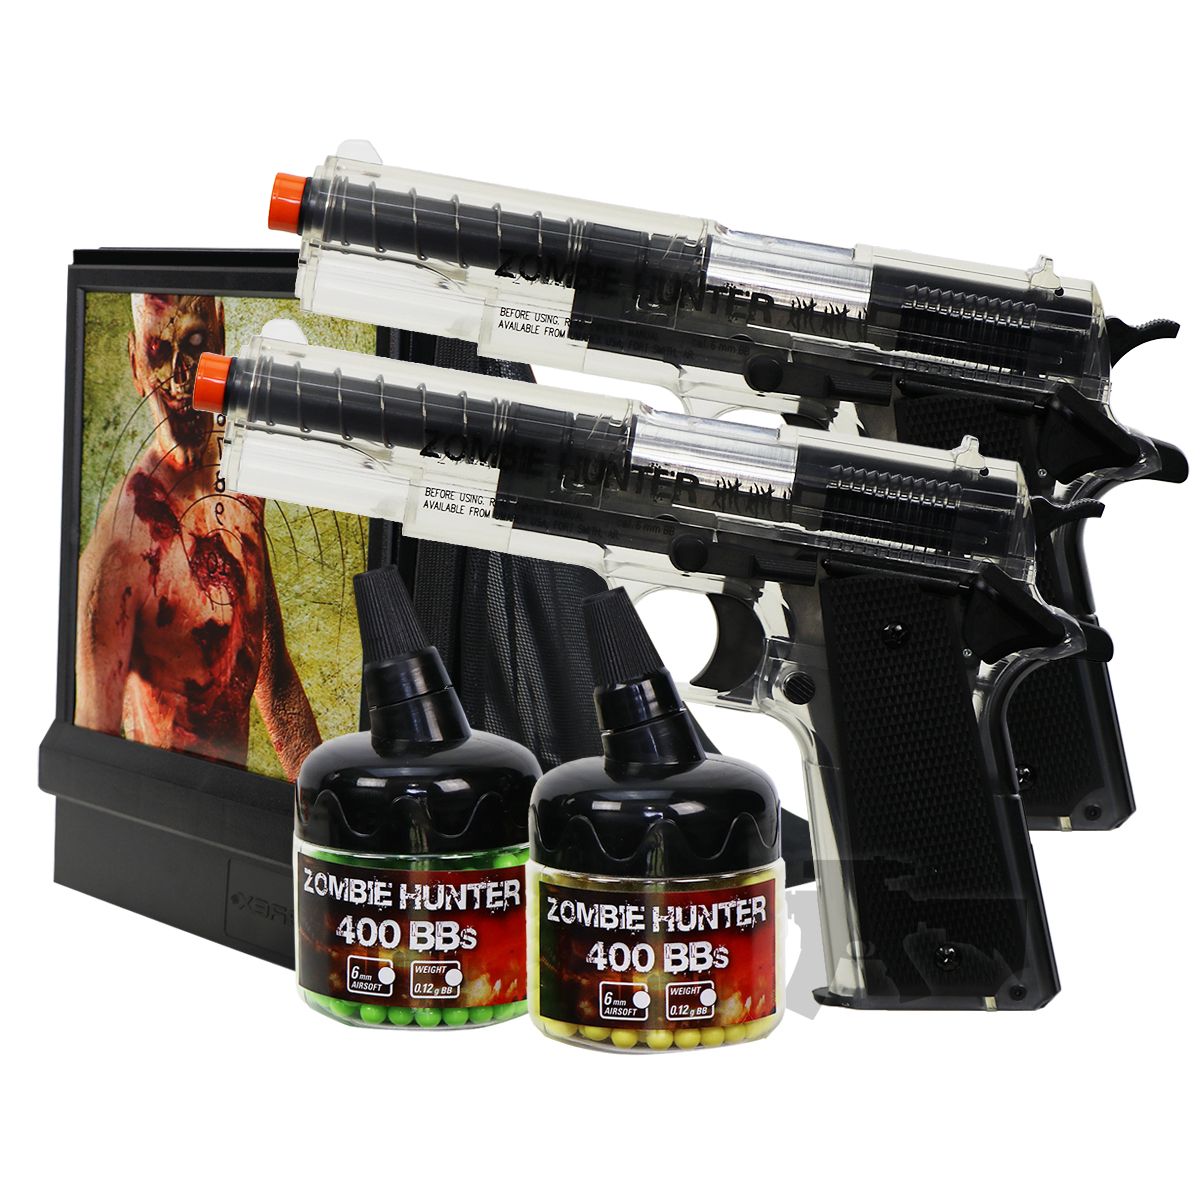 Umarex Zombie Hunter Airsoft Spring 1911 Pistol Bundle With Target 400 0.12g BBS for sale online 